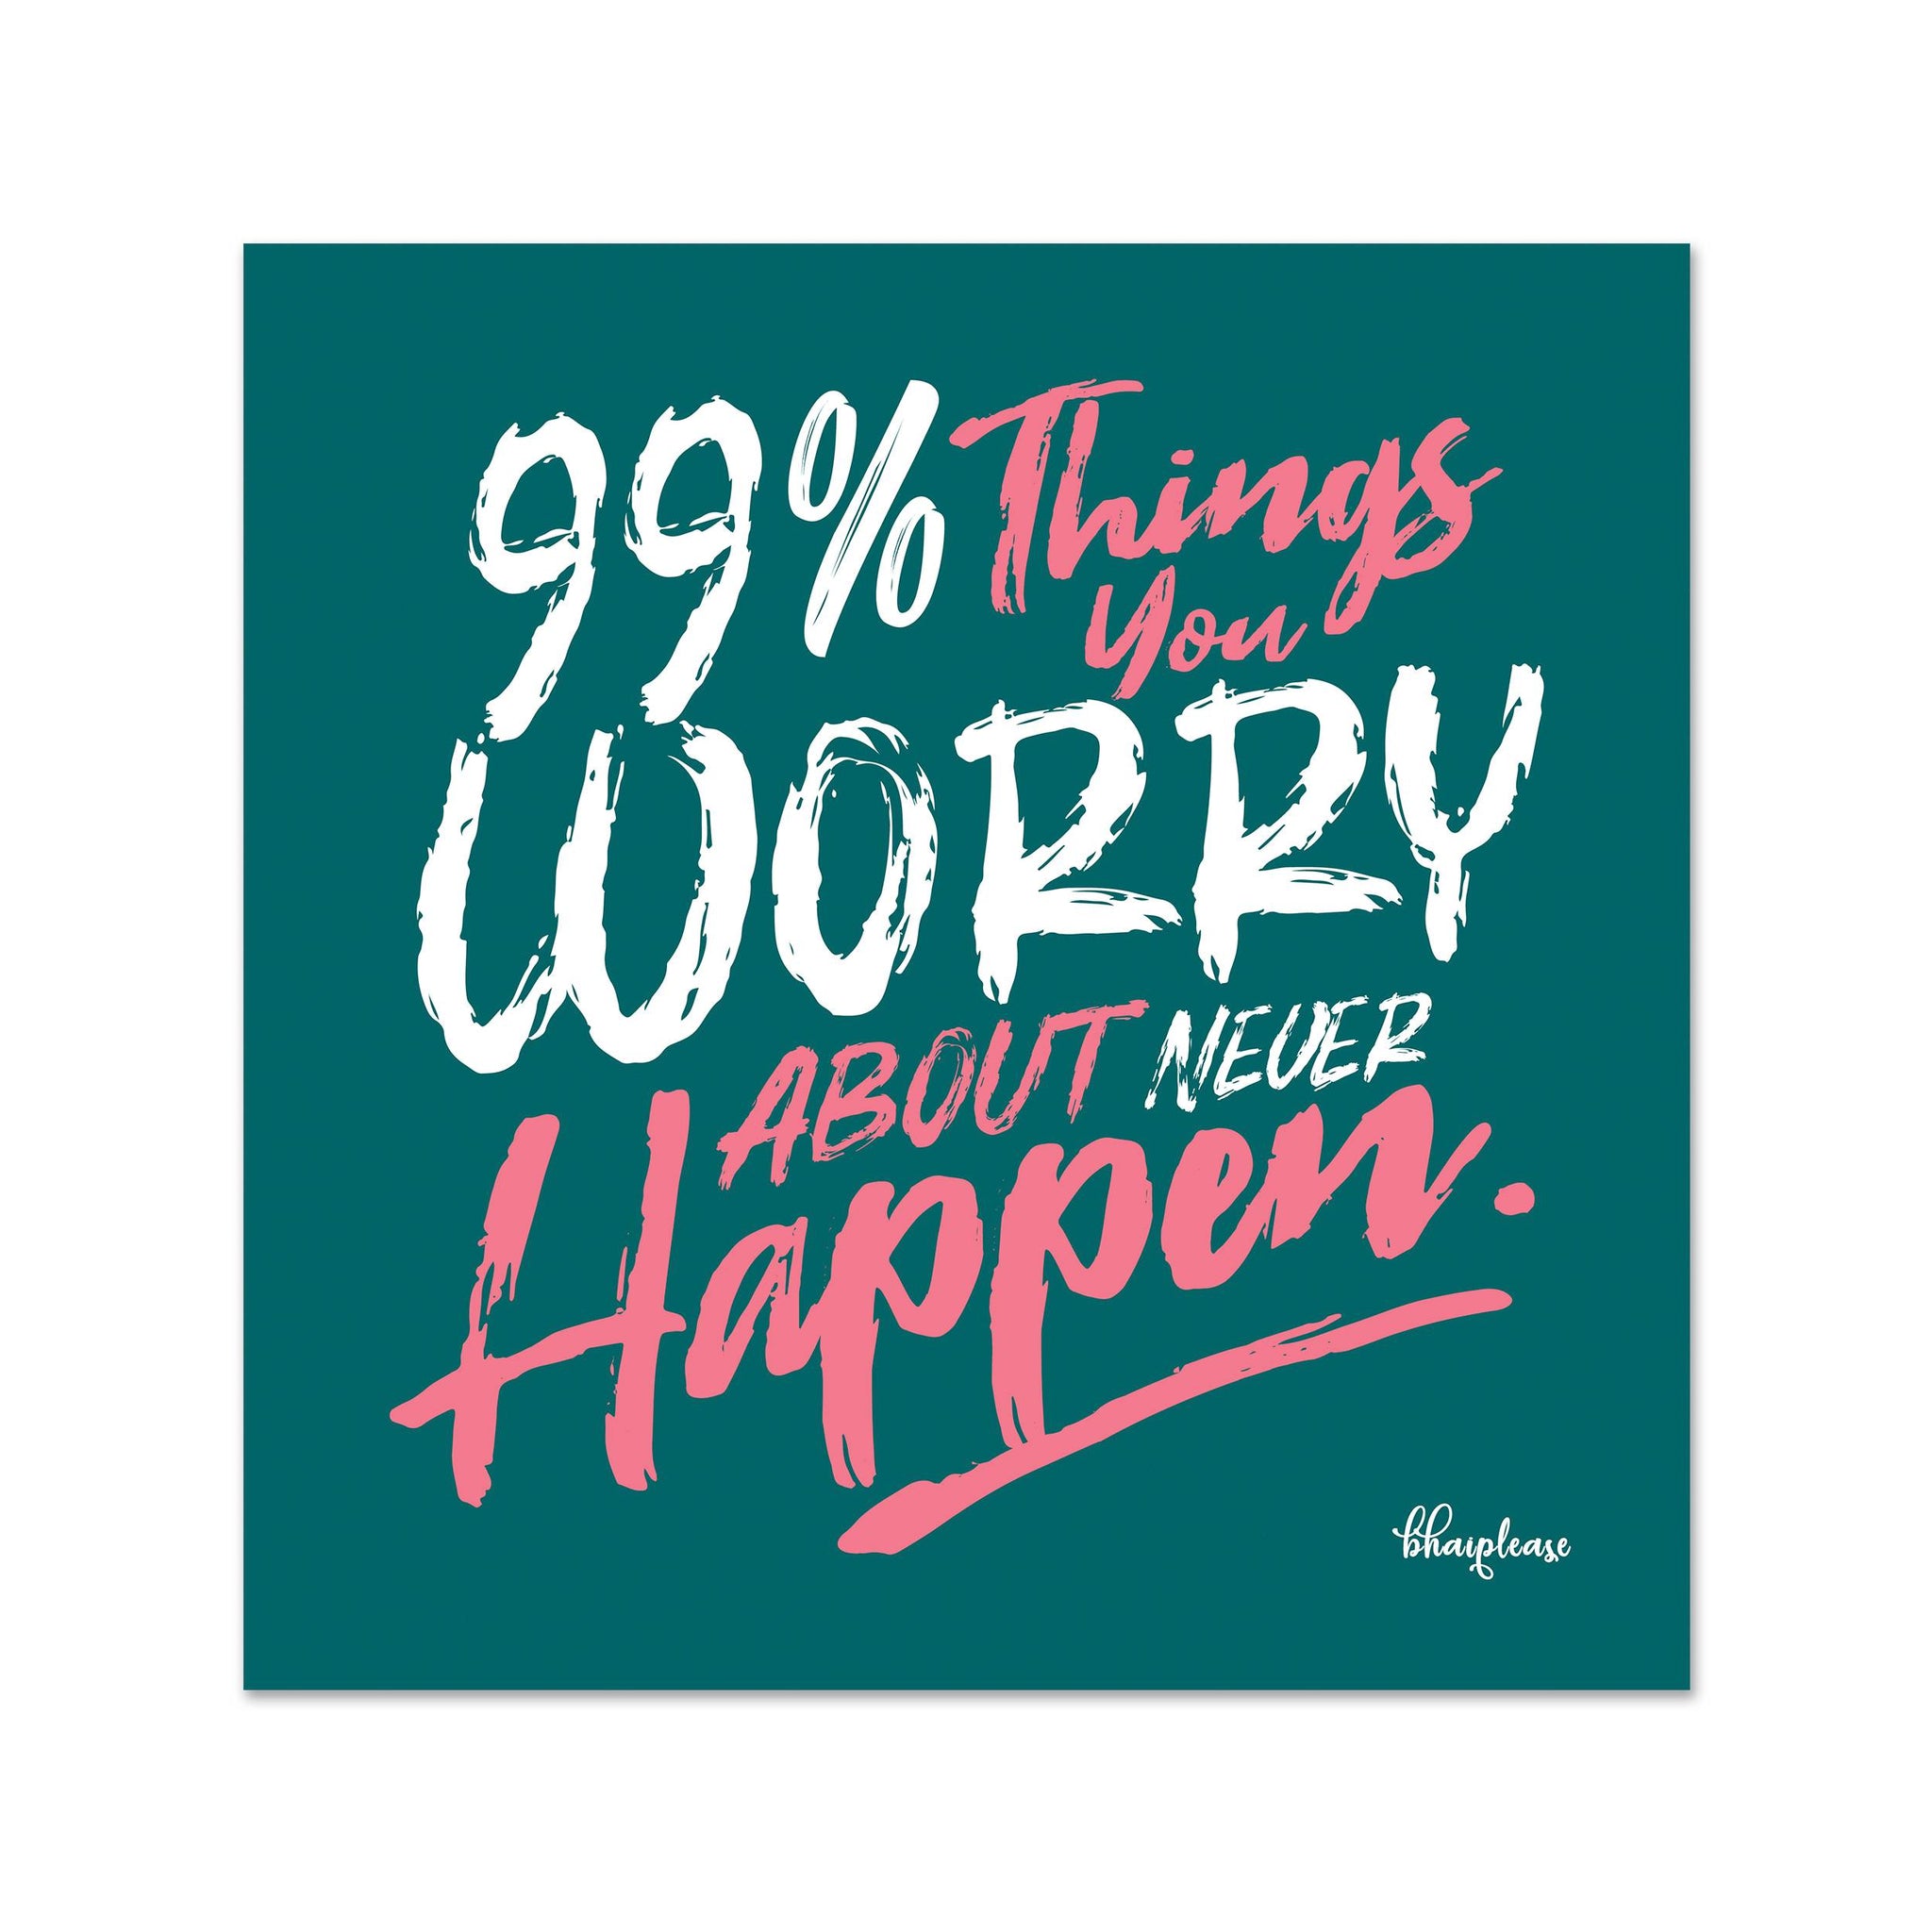 99% Things You Worry About Never Happen Wooden Fridge / Refrigerator Magnet